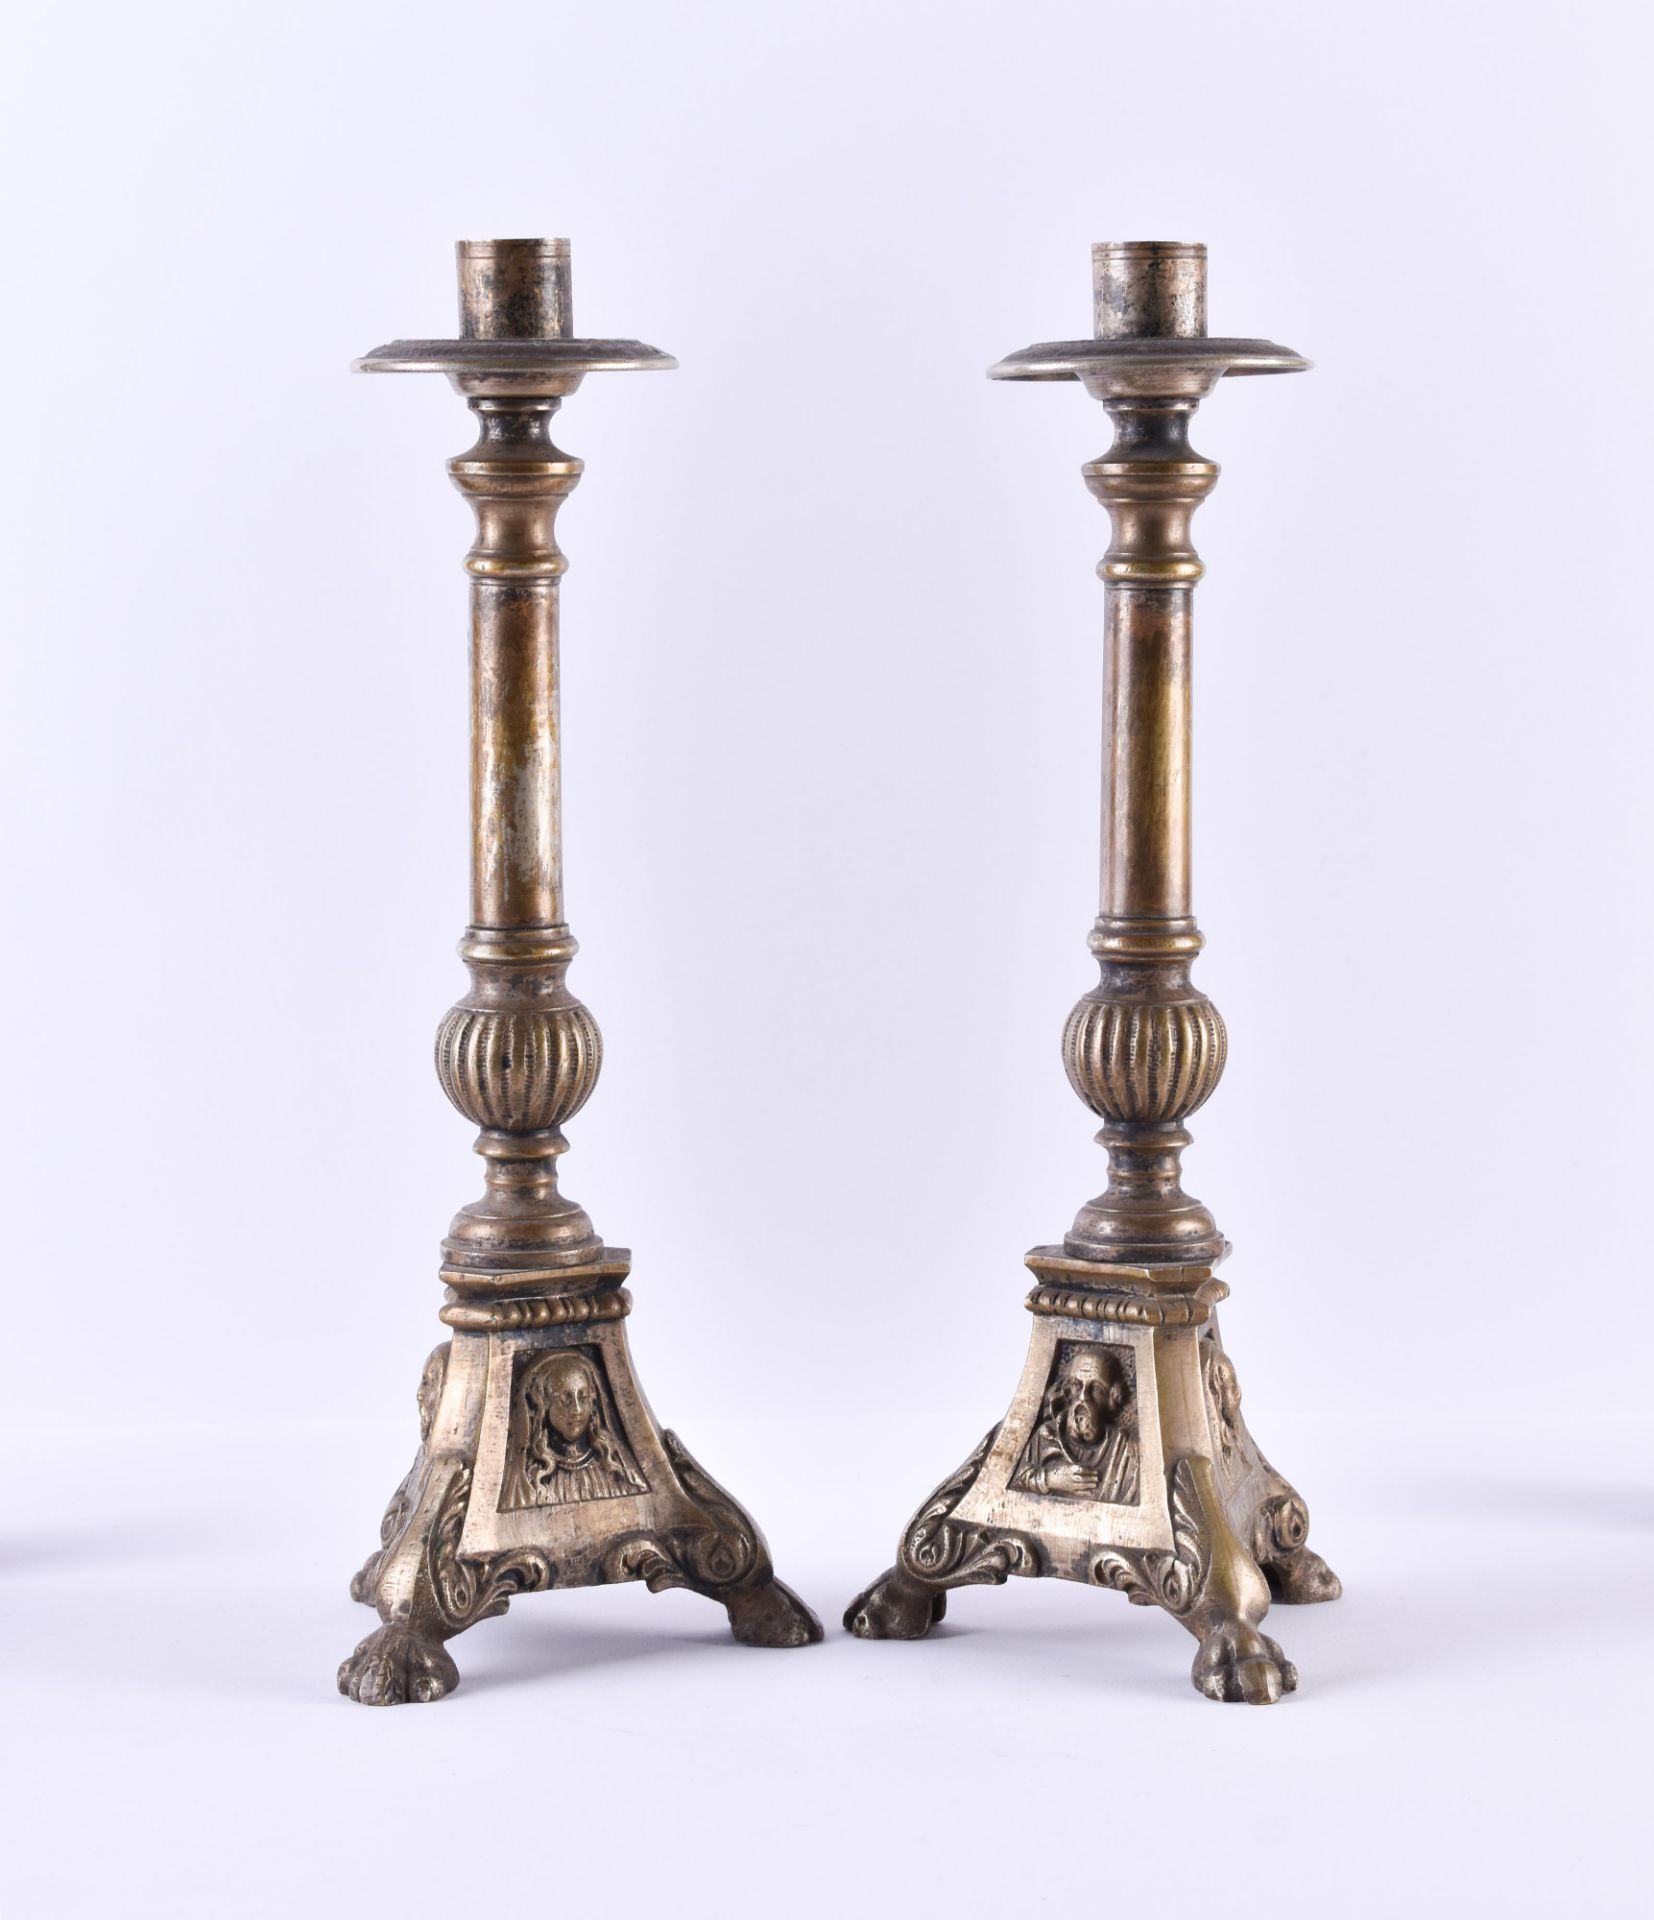 Pair of 19th century altar candlesticks - Image 2 of 3